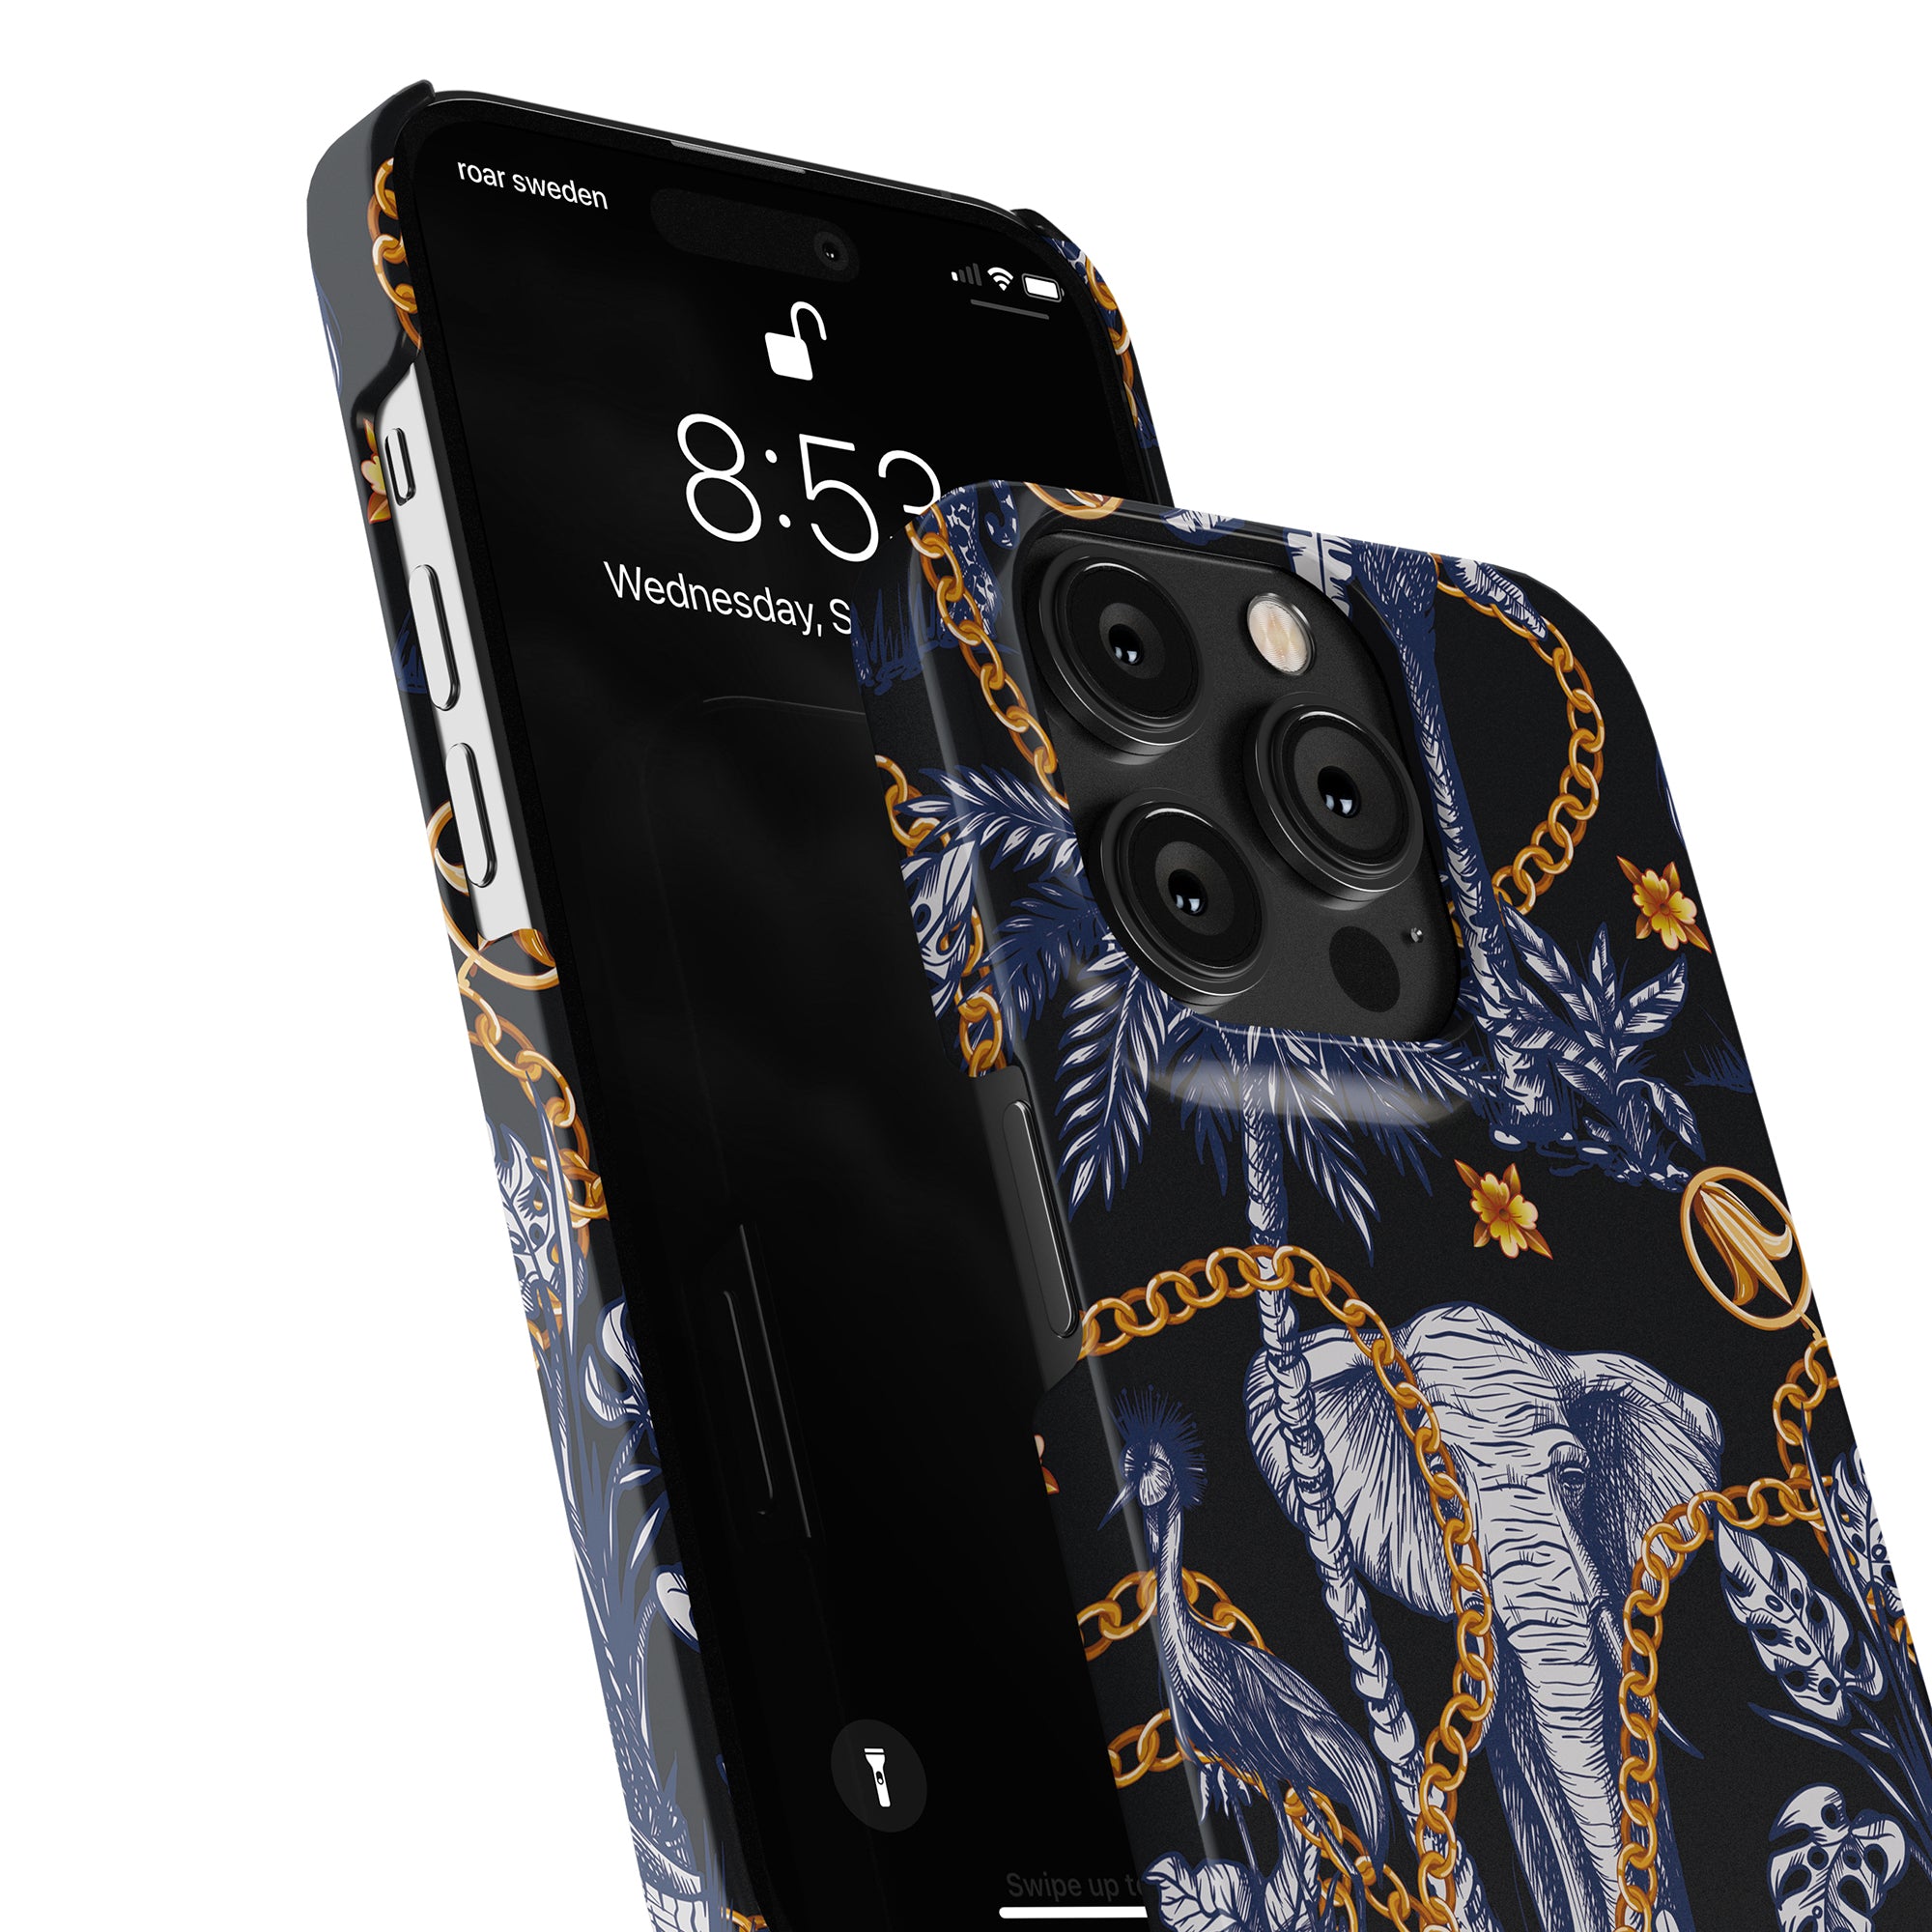 A sleek black and gold mobile case, the Safari - Slim case, designed specifically for iPhone 11 Pro. This stylish case not only provides excellent protection but also adds a touch of elegance to your.